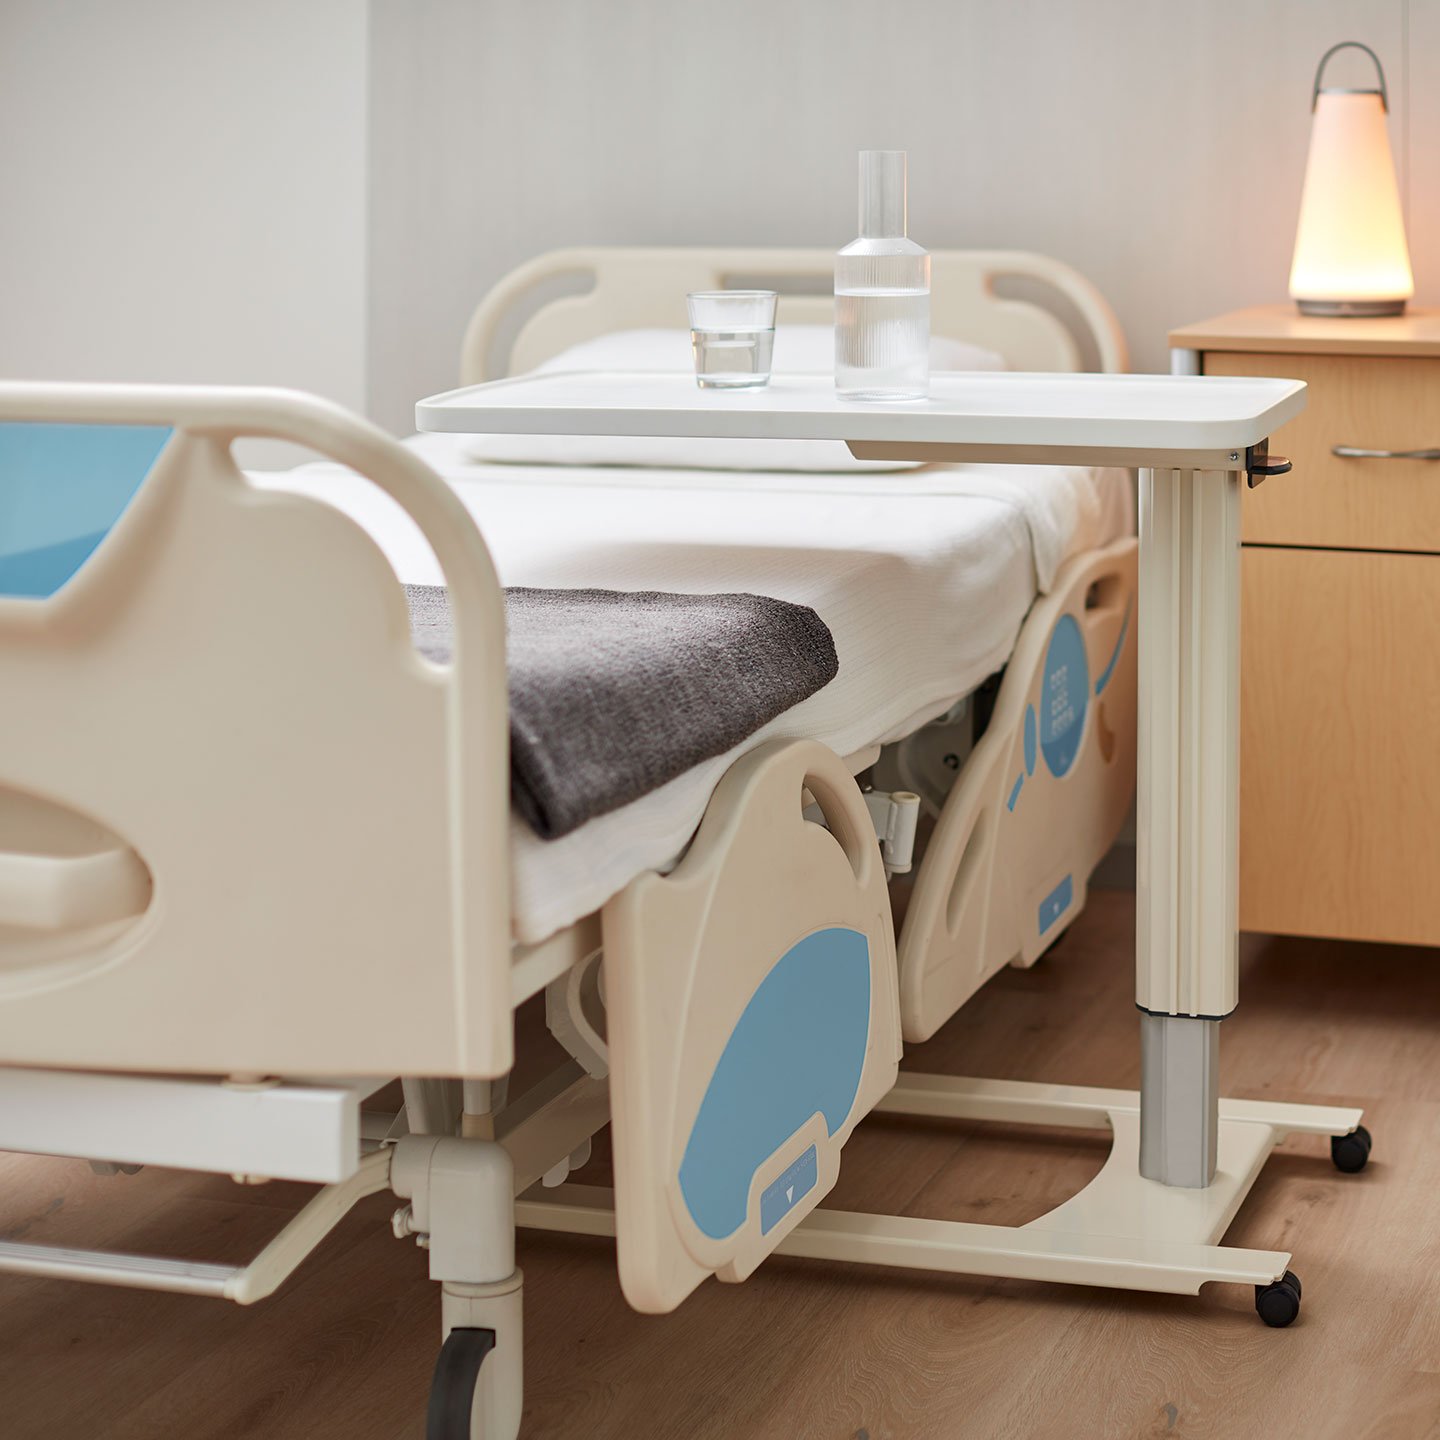 Haworth Overbed Table over a hospital bed in a hospital room with a glass of water on the table